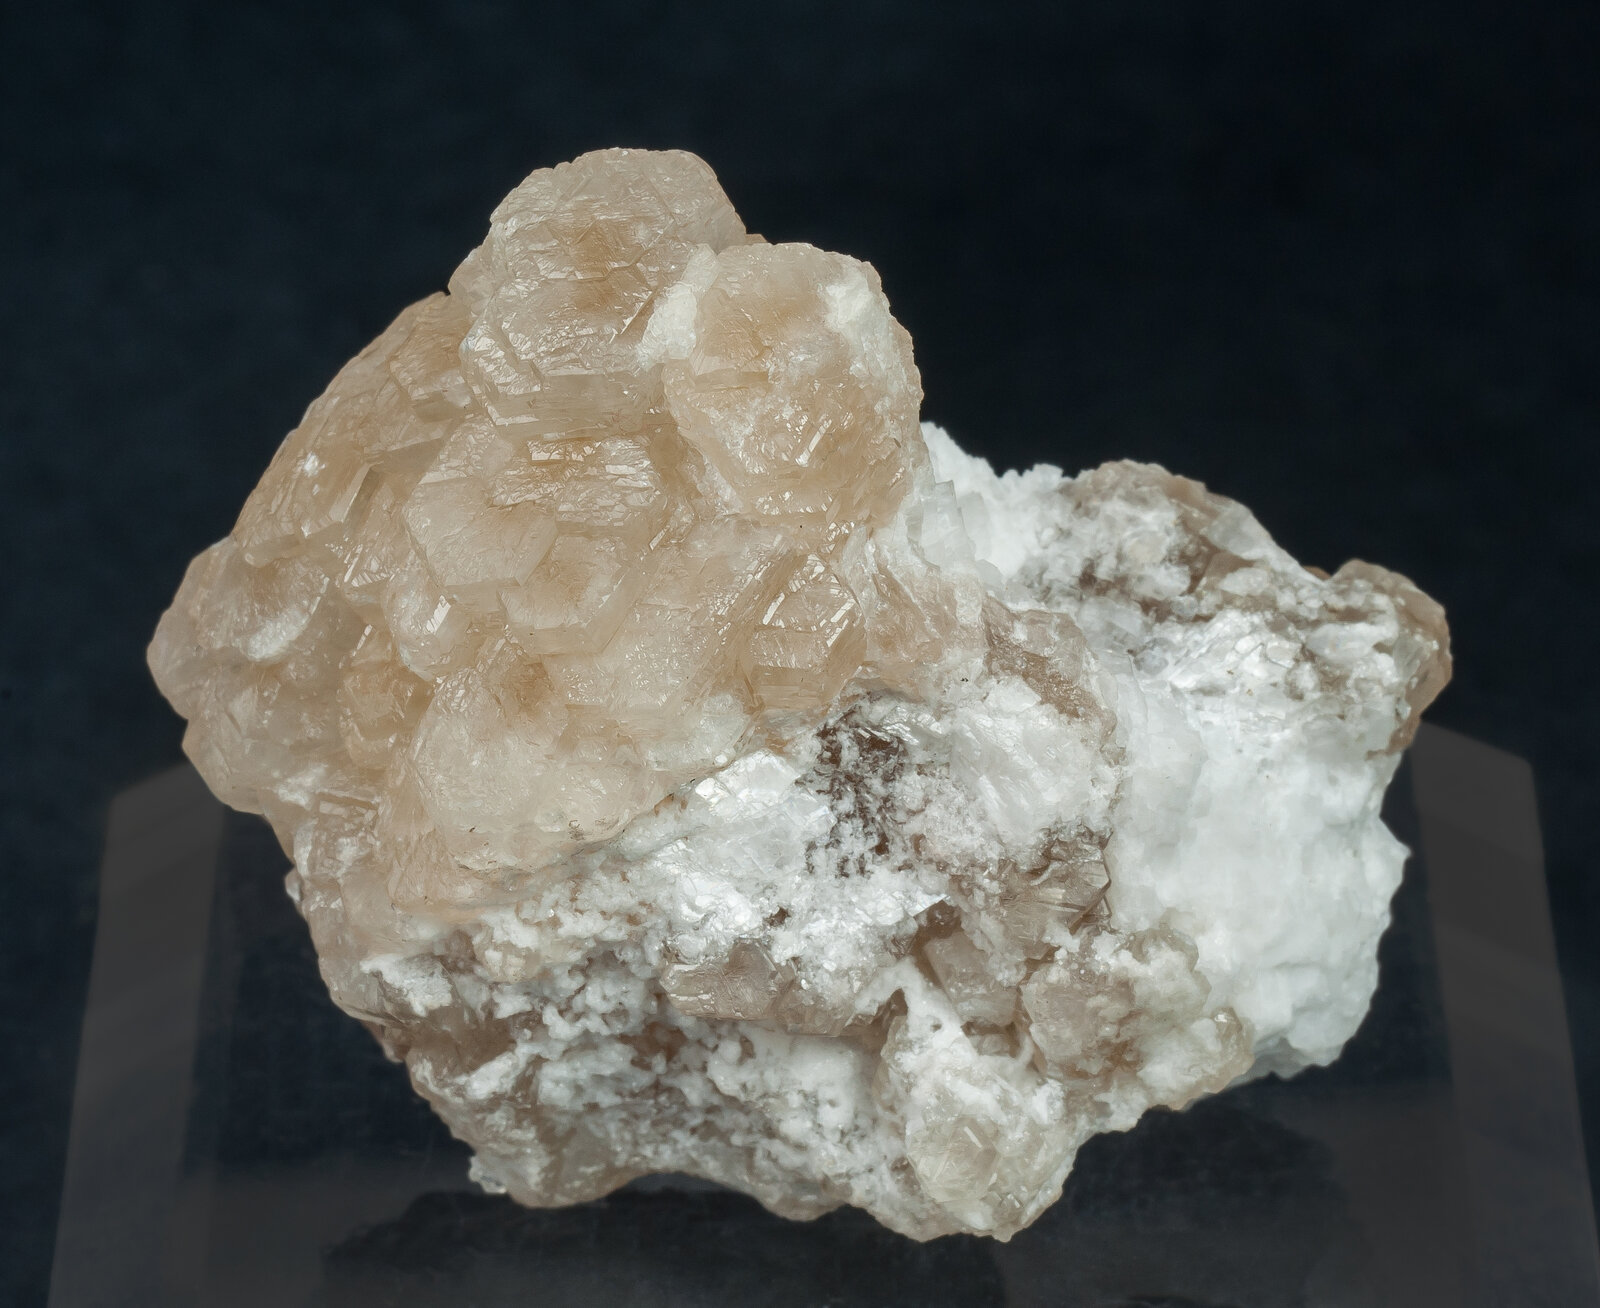 specimens/s_imagesAN1/Strontianite-CP86AN1s.jpg